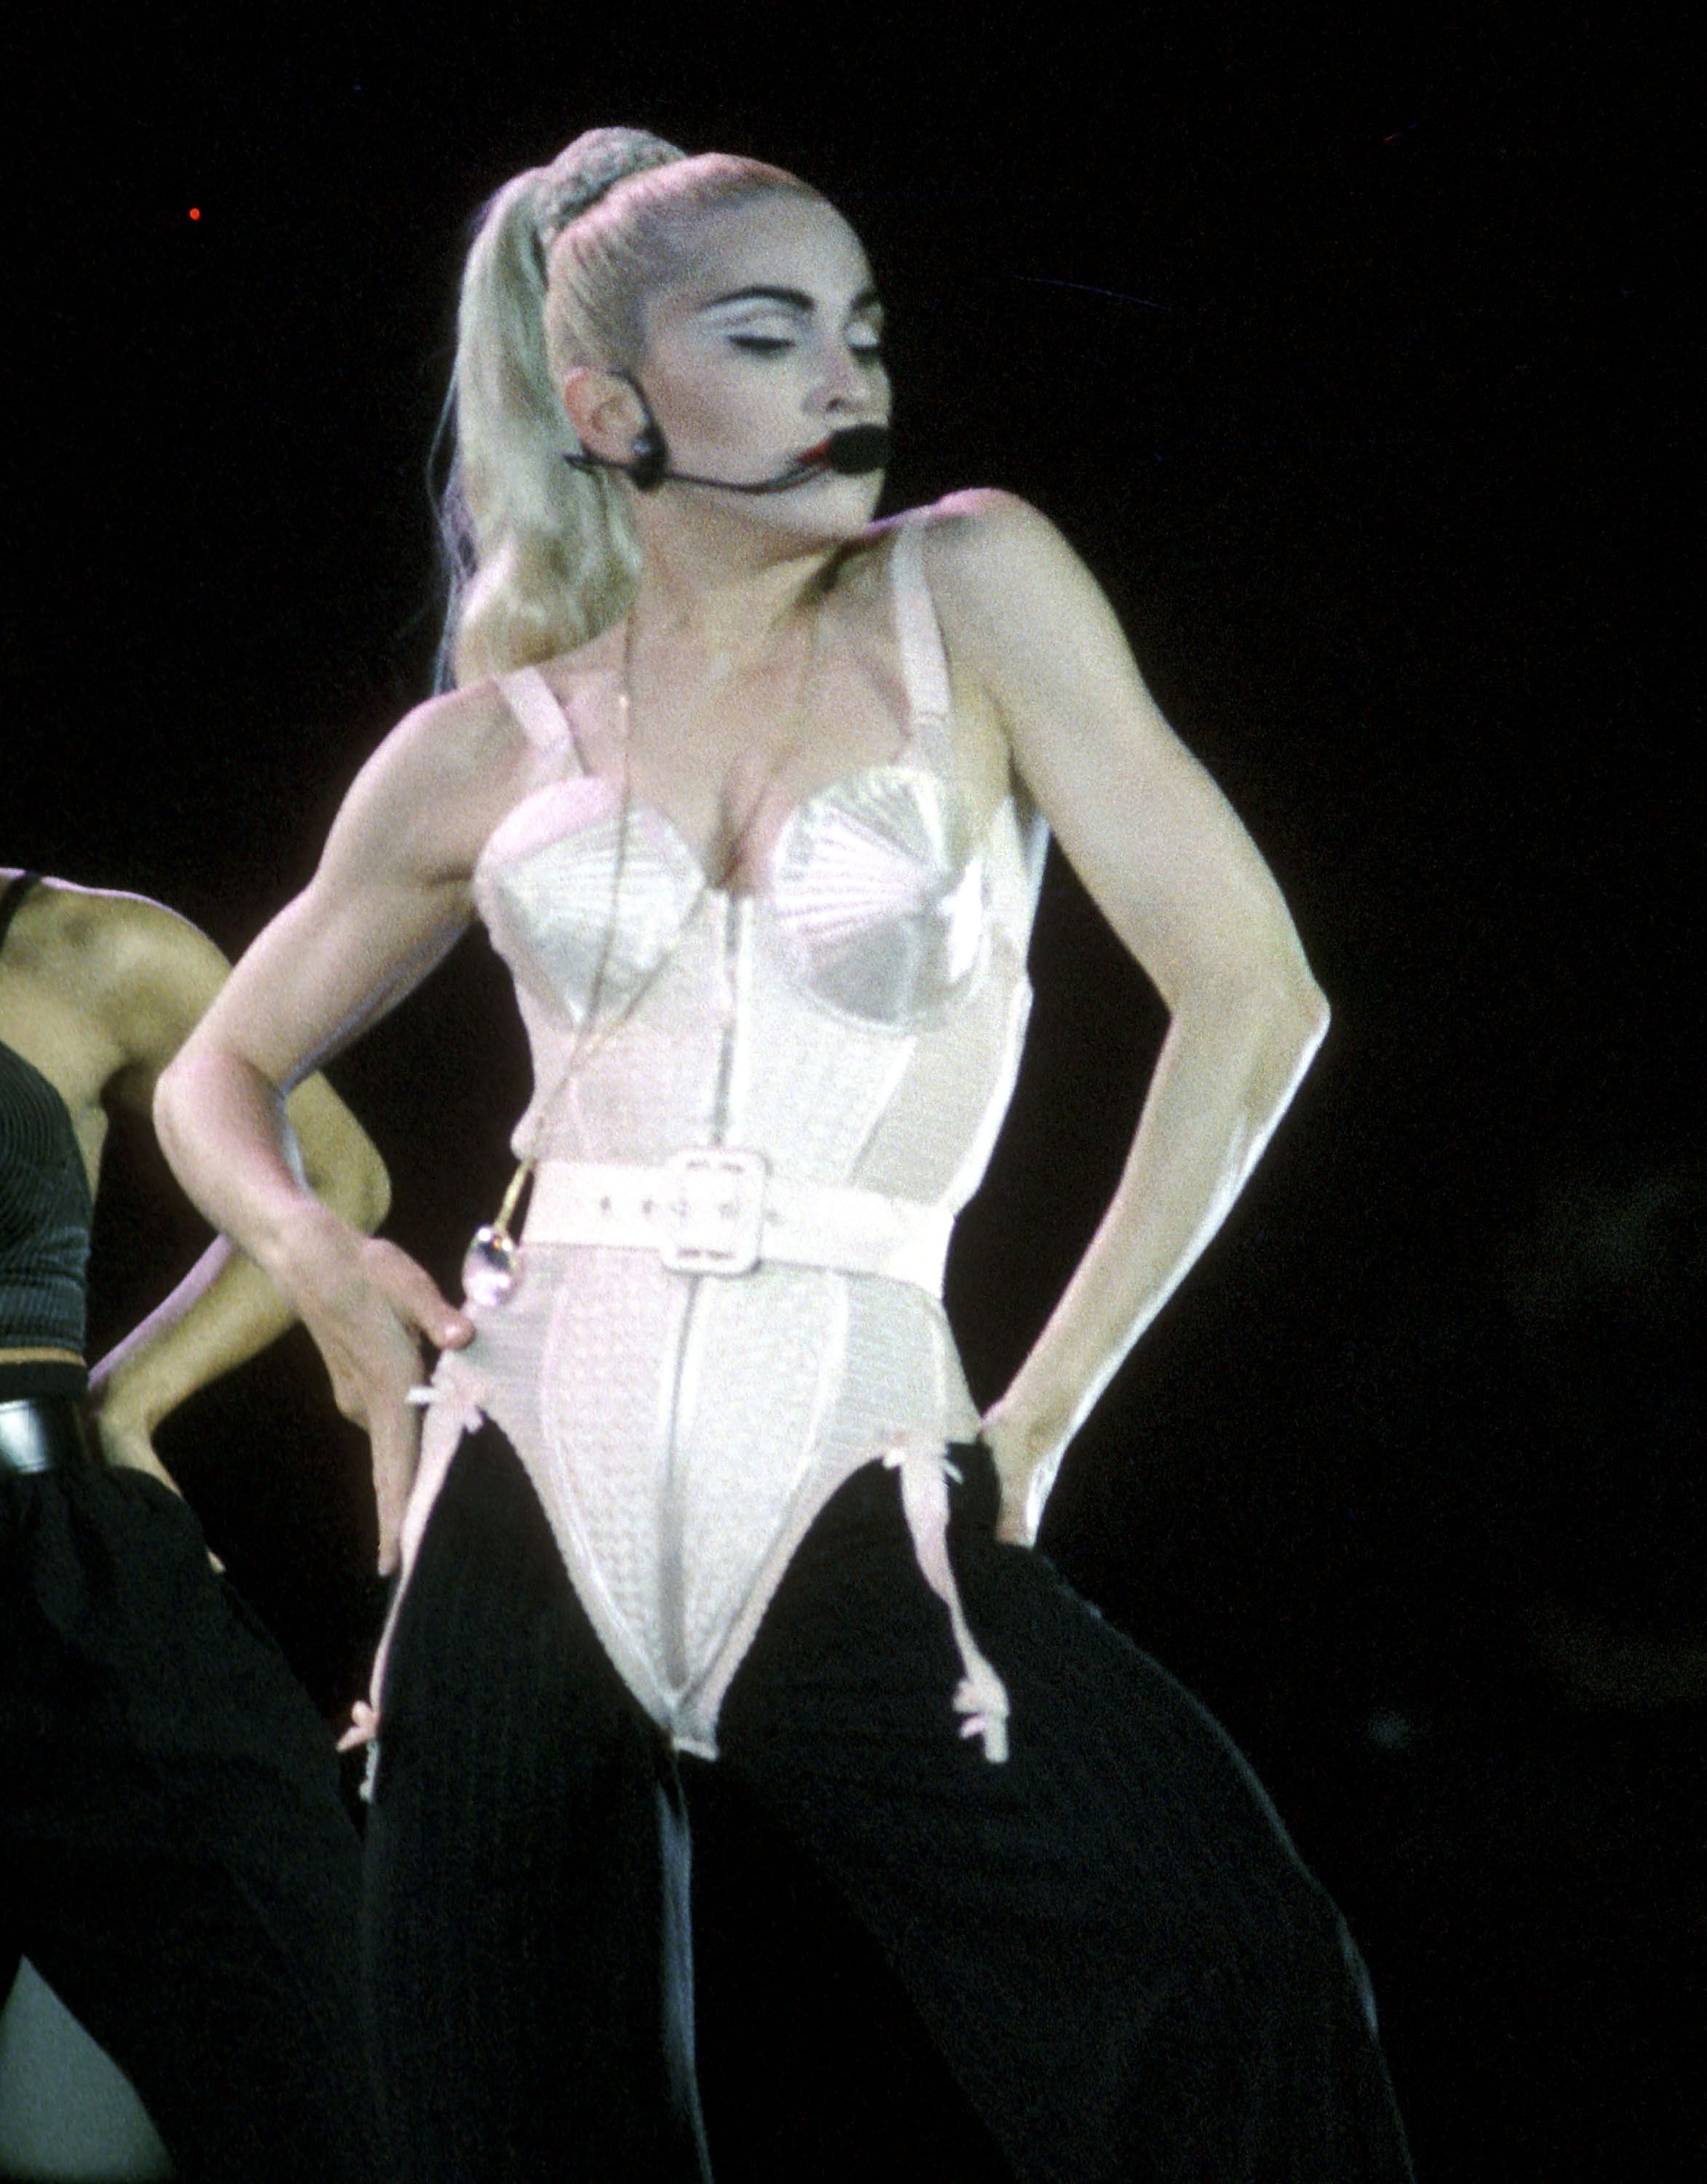 From Madonna's iconic conical bra to her Big D**k Energy, here's